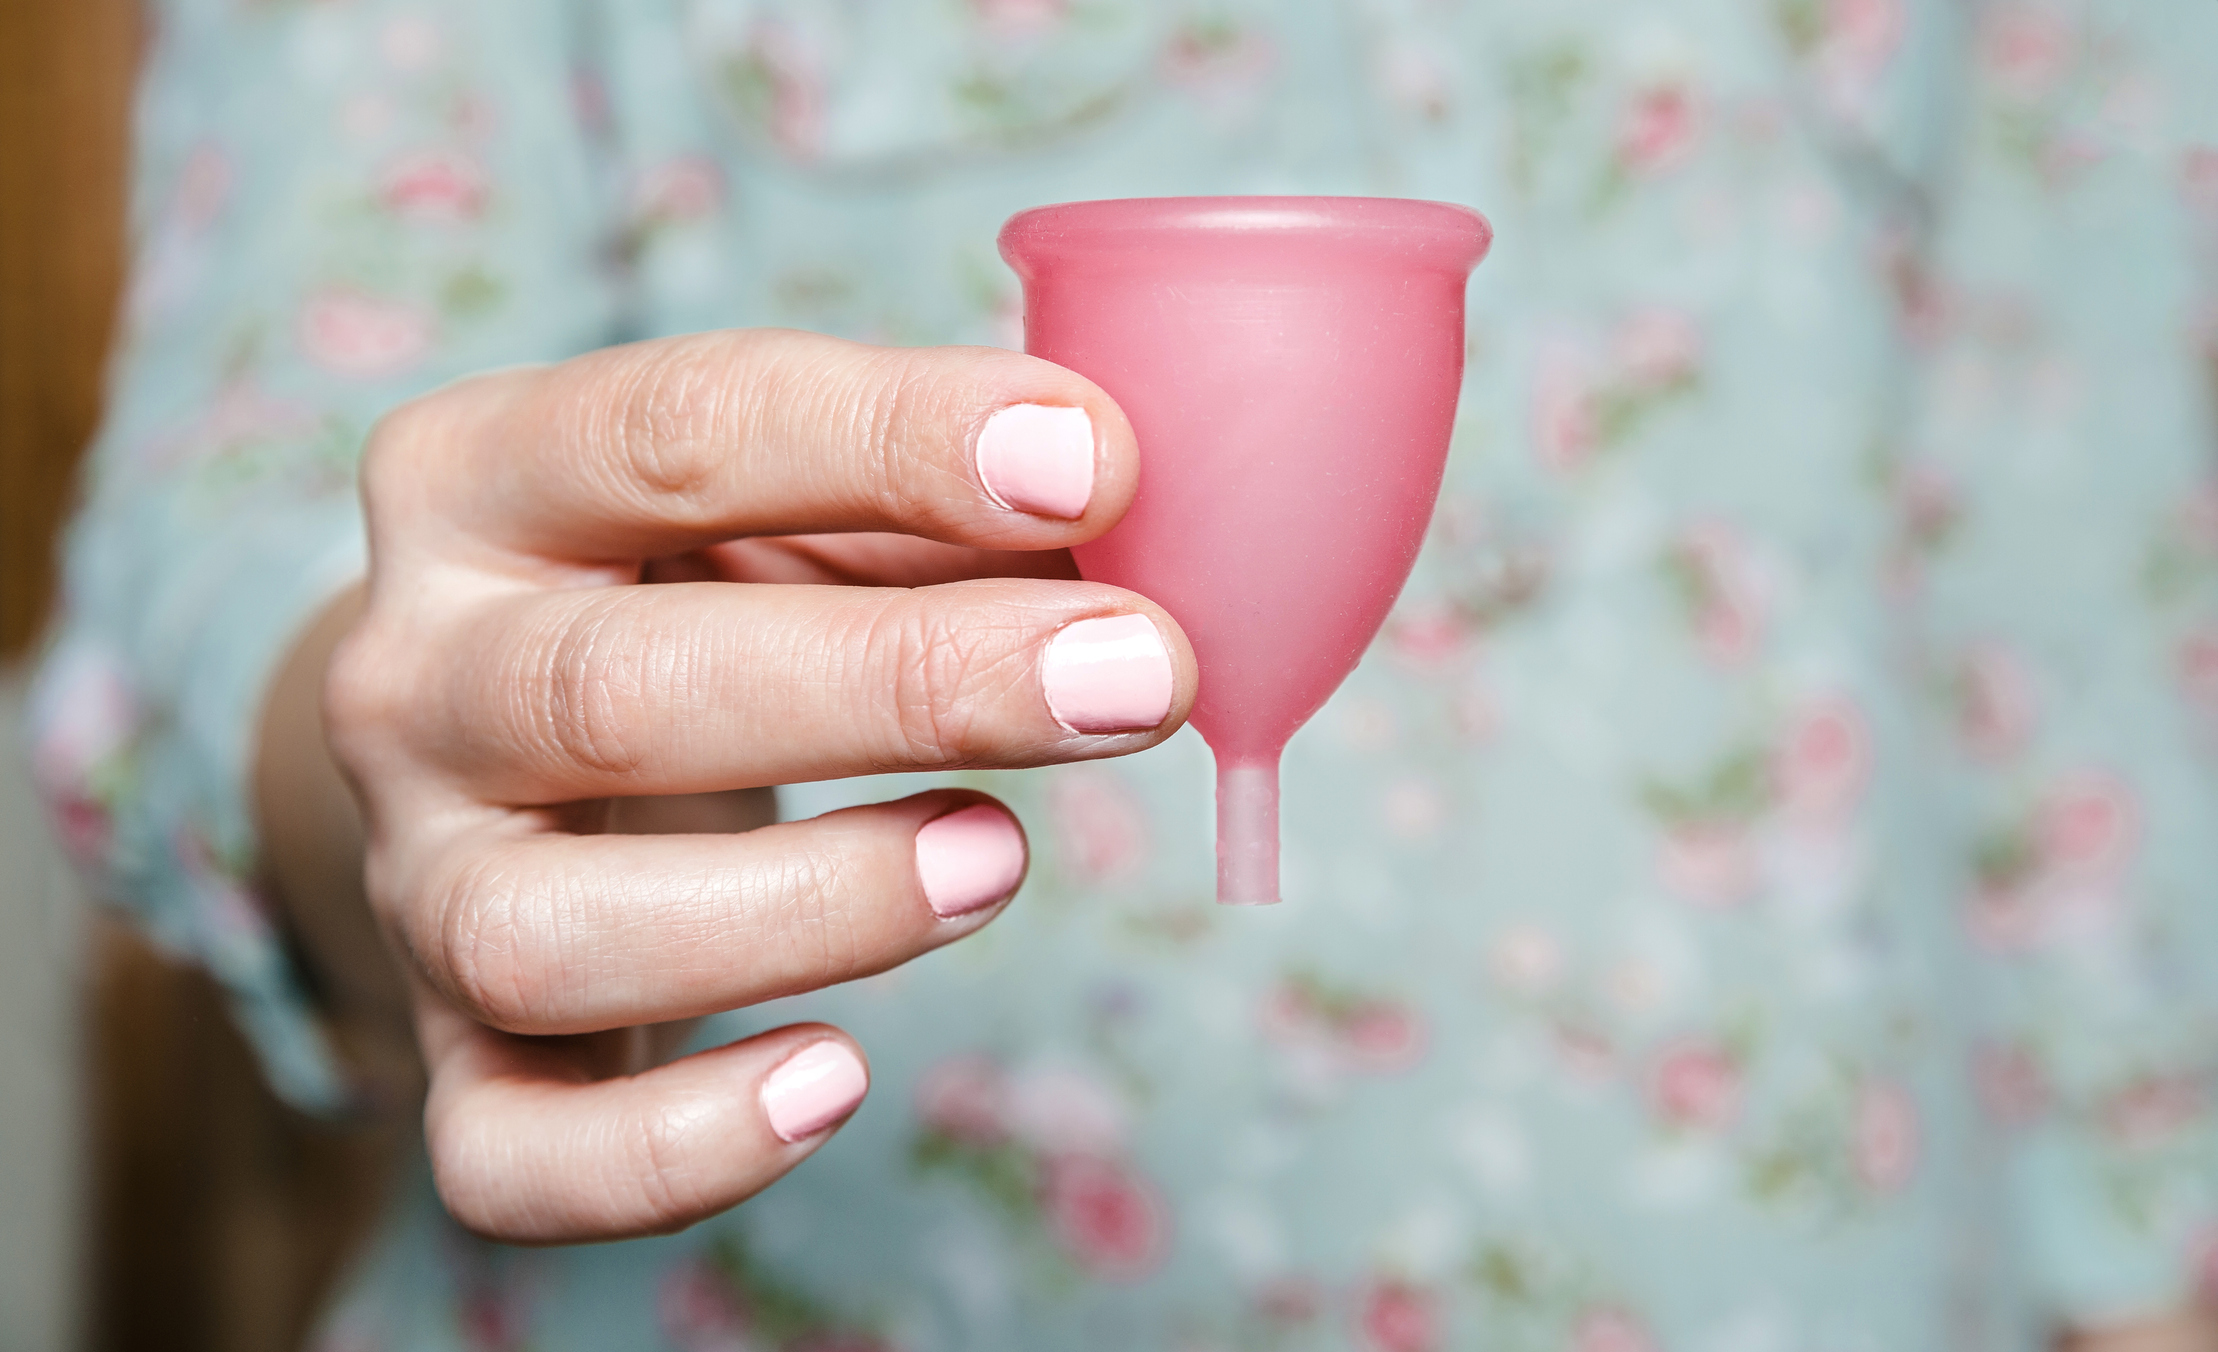 Menstrual Cups: How To Use, Benefits, Risks, And More, 51% OFF